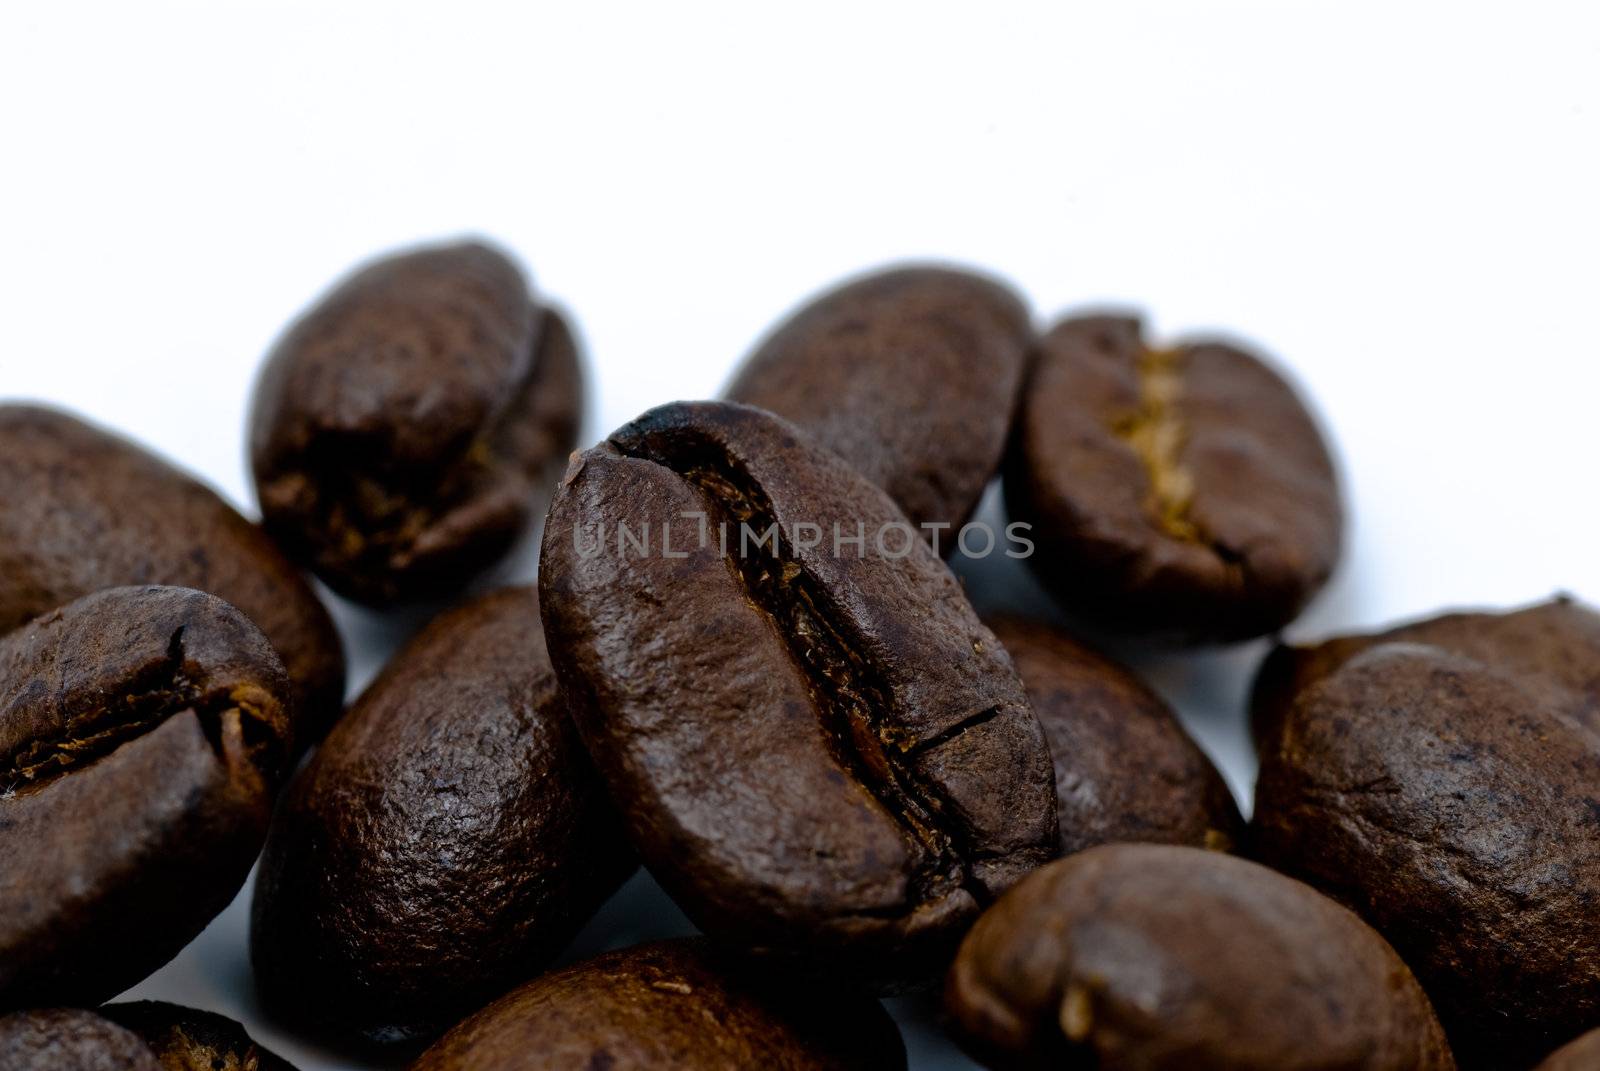 Closeup of roasted coffee beans on whitw surface